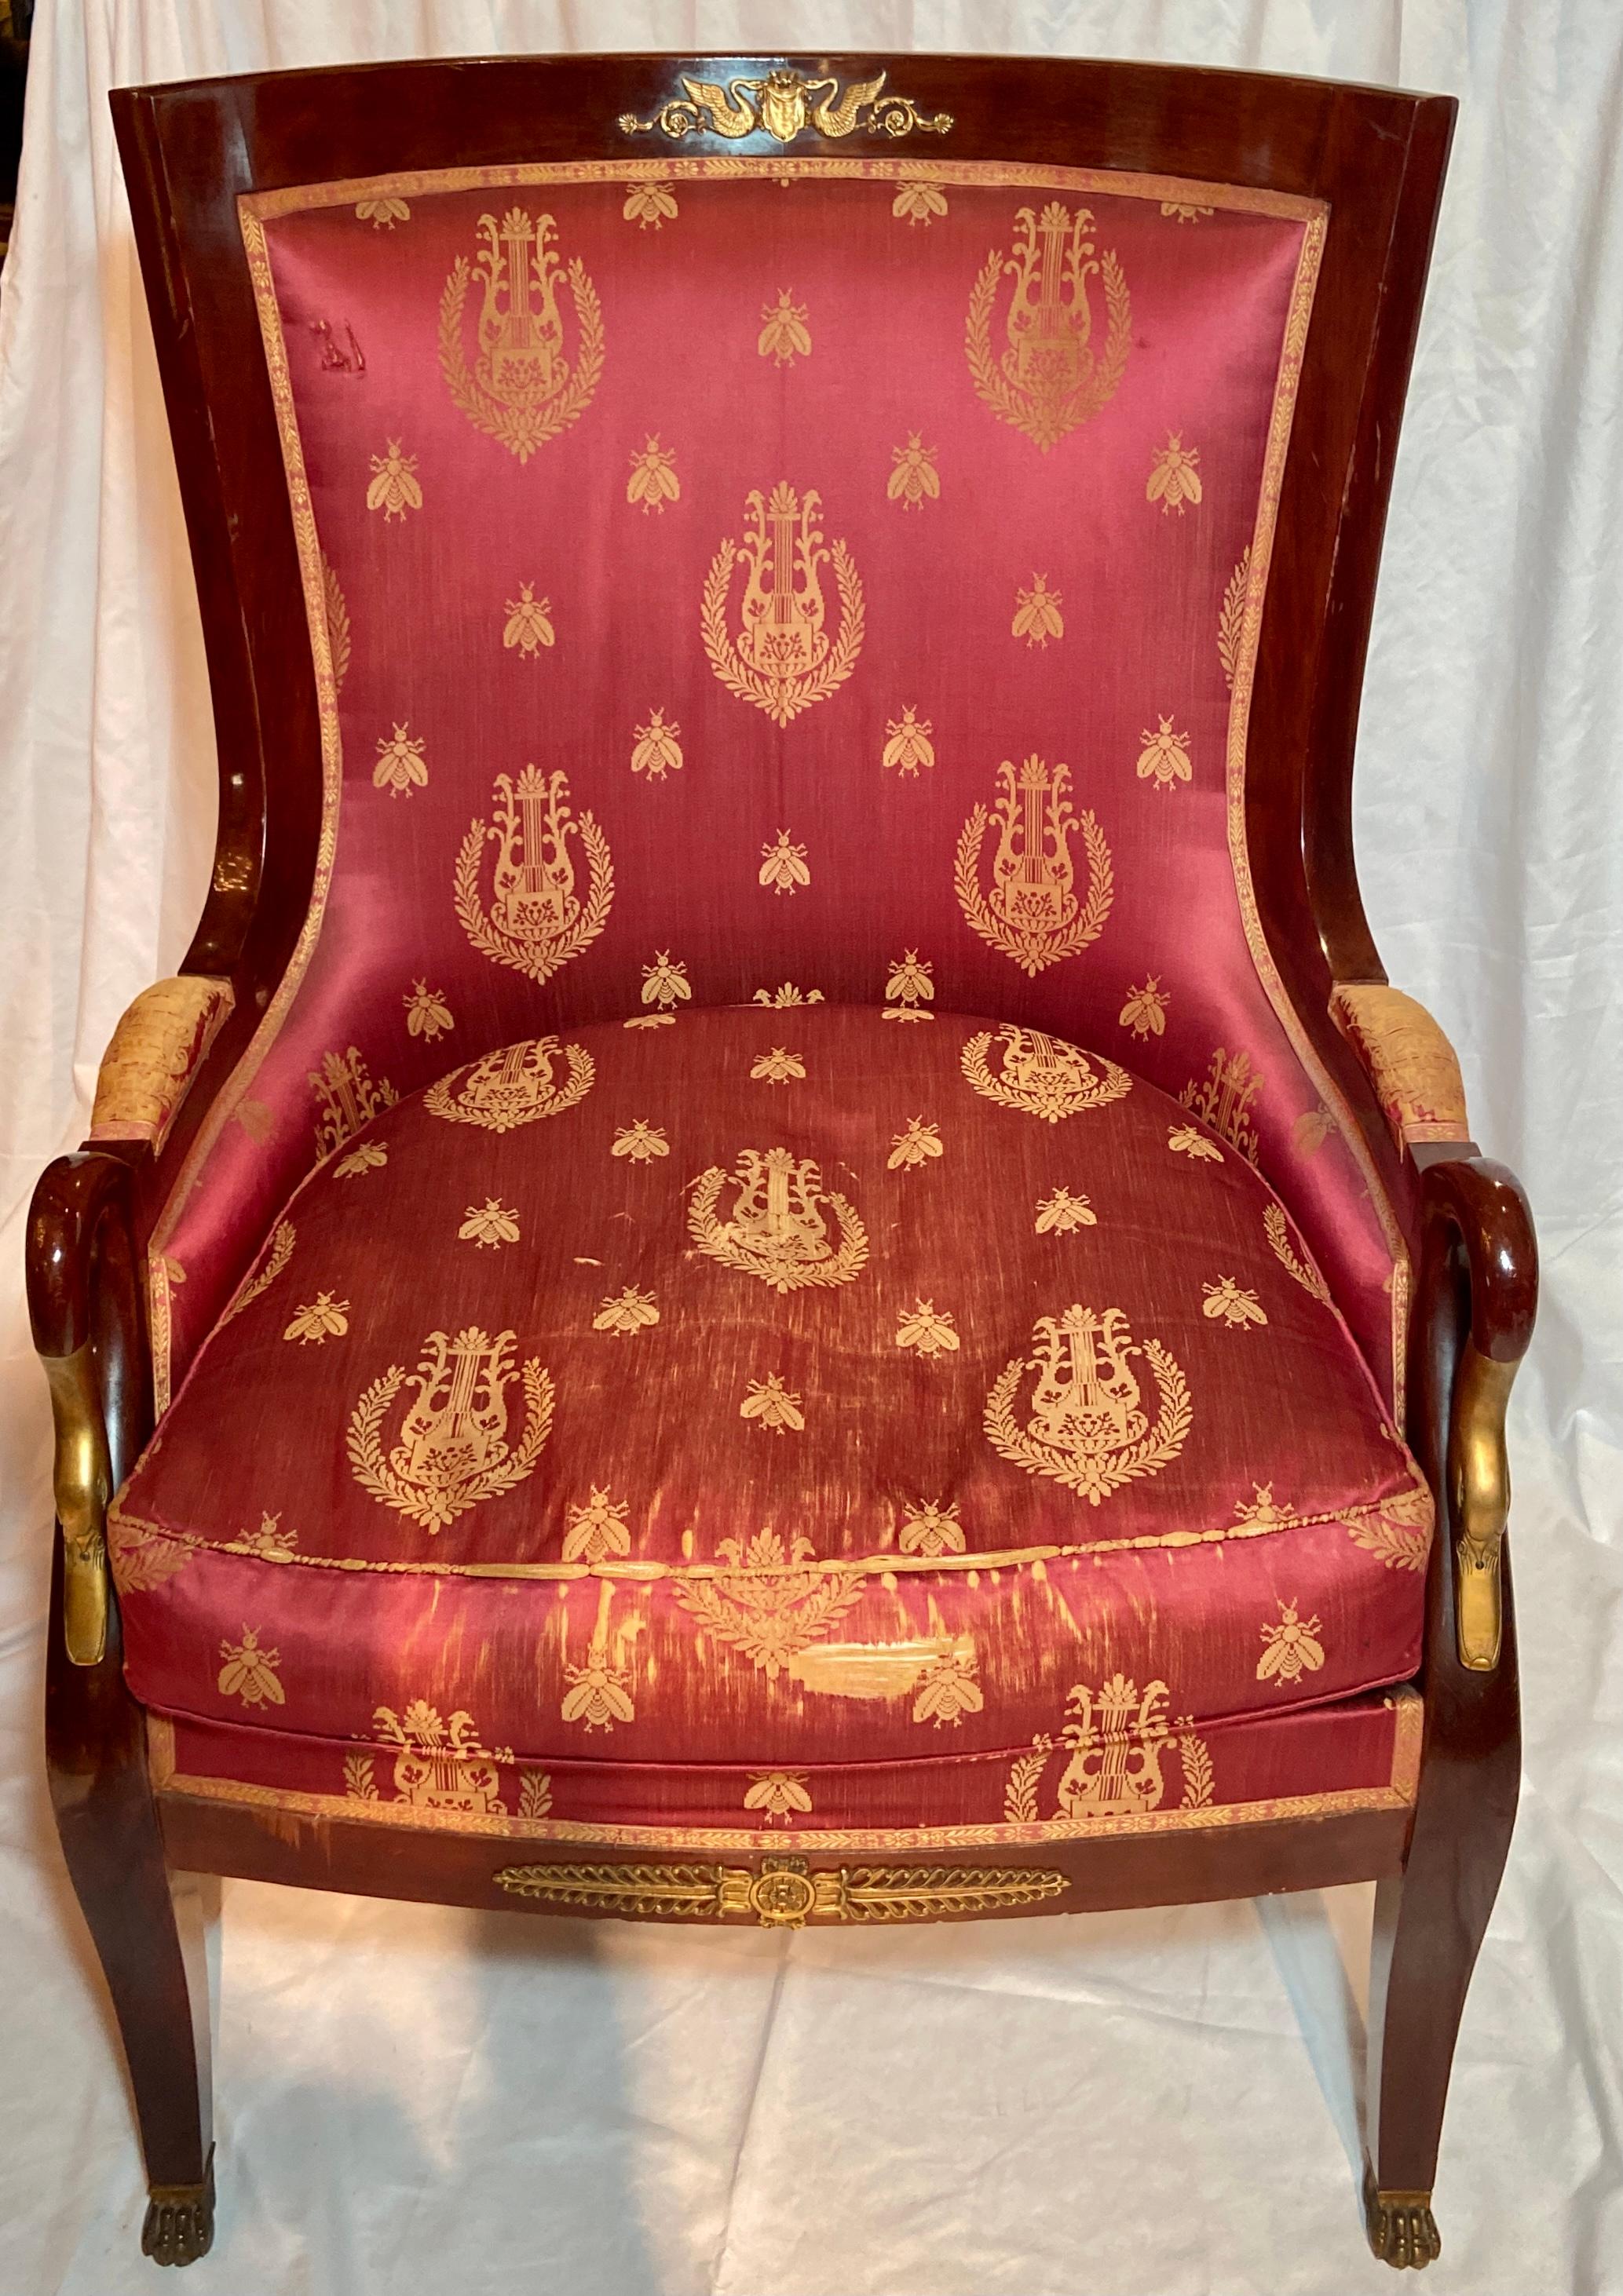 Pair antique French Empire ormolu mounted mahogany bergere armchairs with red & gold upholstery, Circa 1890.